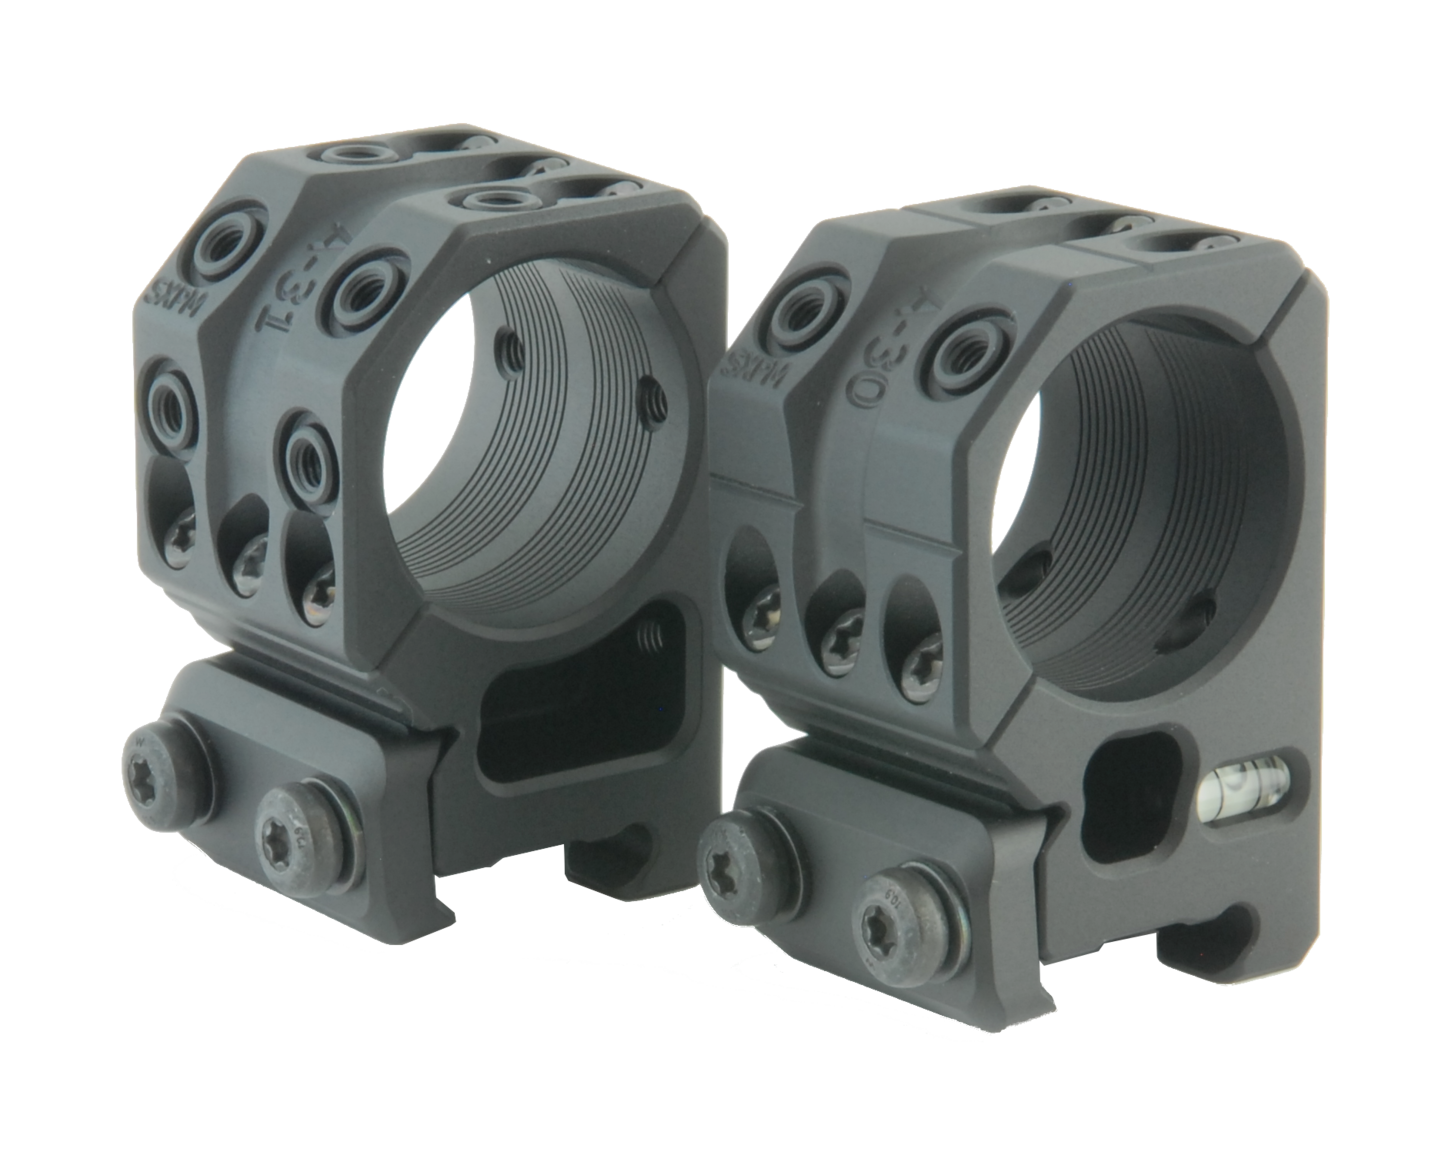 Spuhr ISMS Scope Mount / Rings - SR Separate Picatinny Rings - Australian Tactical Precision